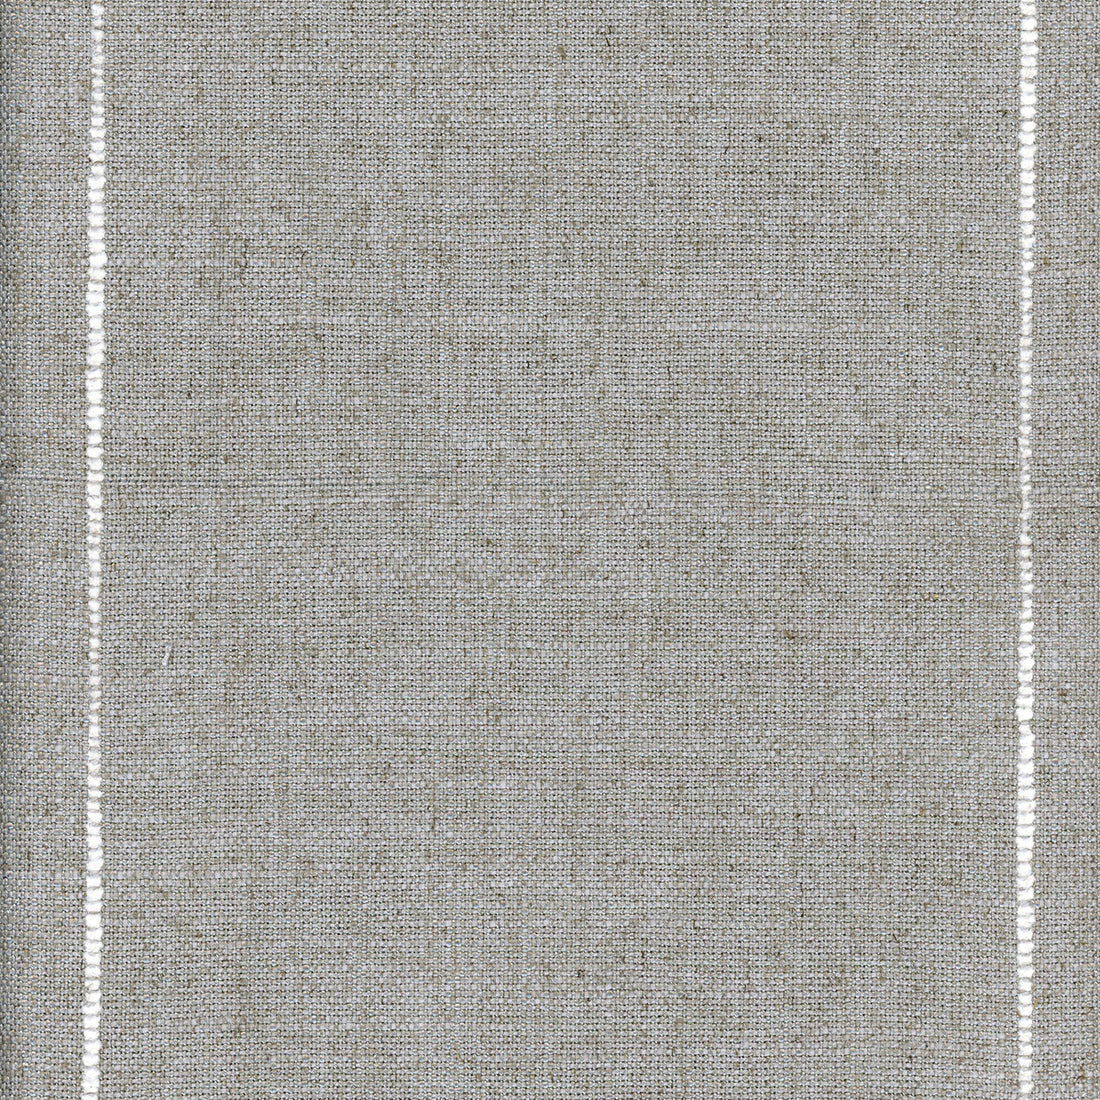 Selvaggio fabric in pebble color - pattern AM100328.11.0 - by Kravet Couture in the Andrew Martin Salento collection